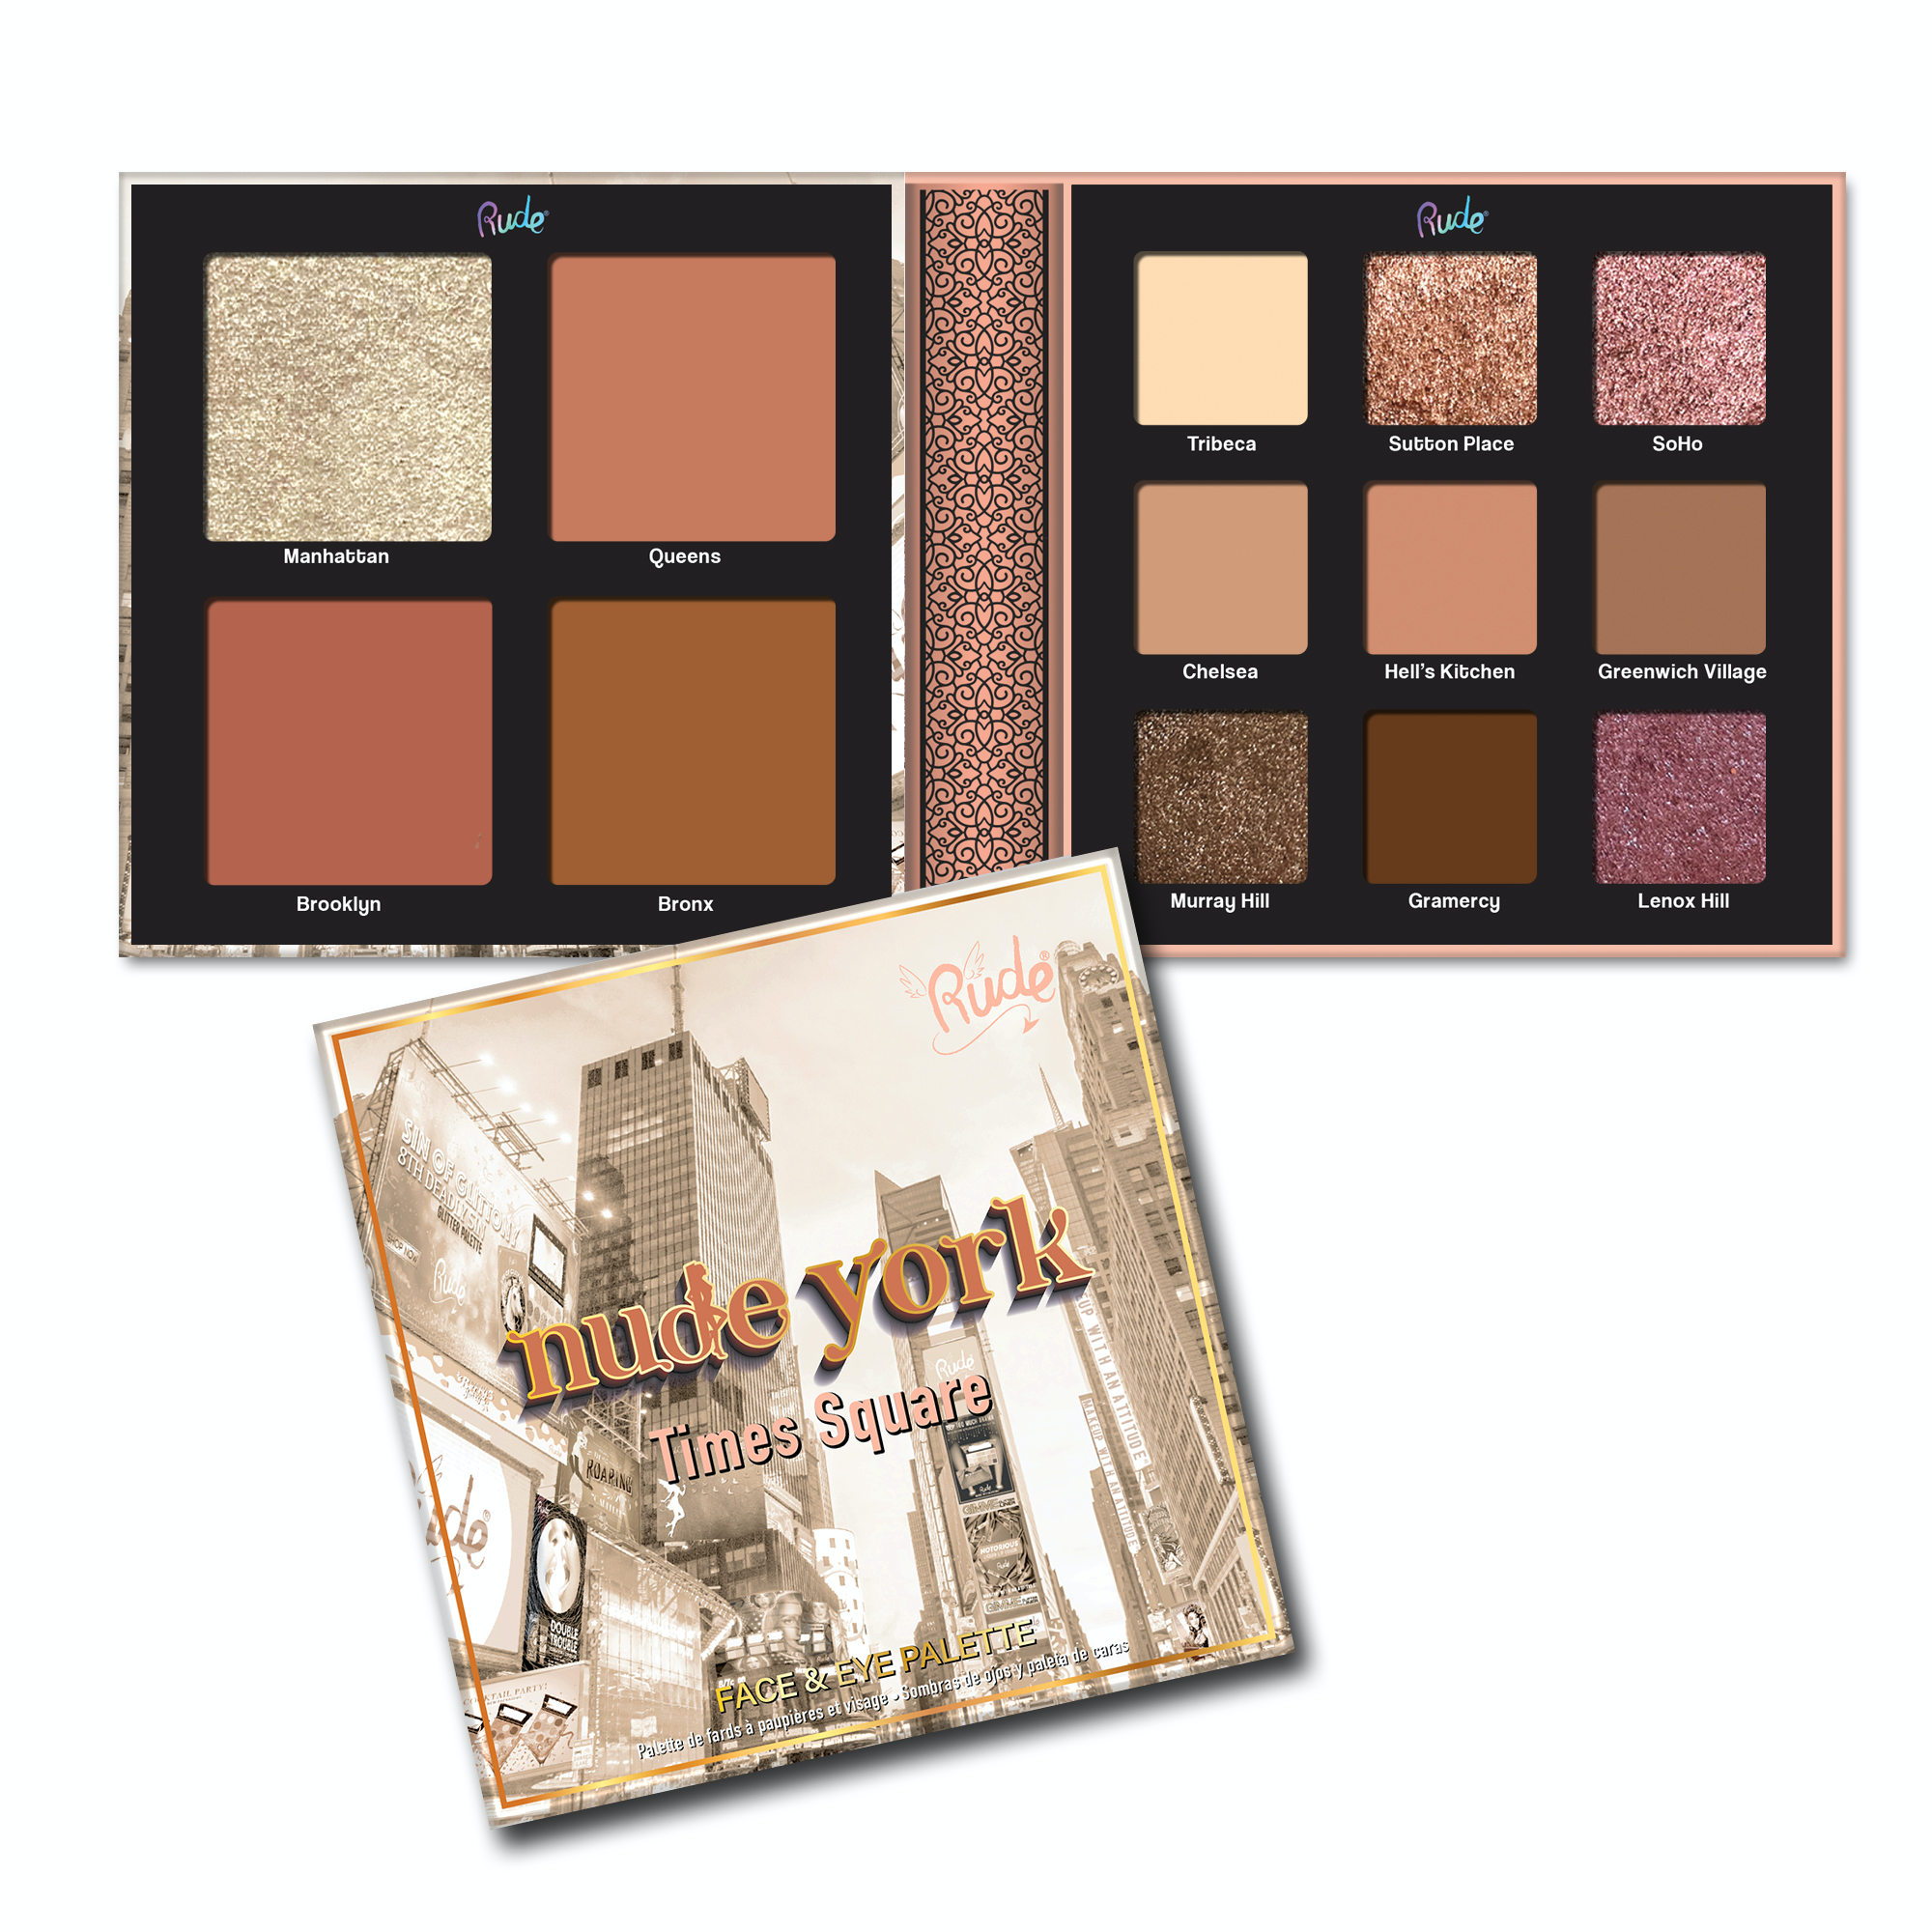 Rude Cosmetics Nude York Eyeshadow and Face Palette. Featuring Neutral, Warm Tone Shades